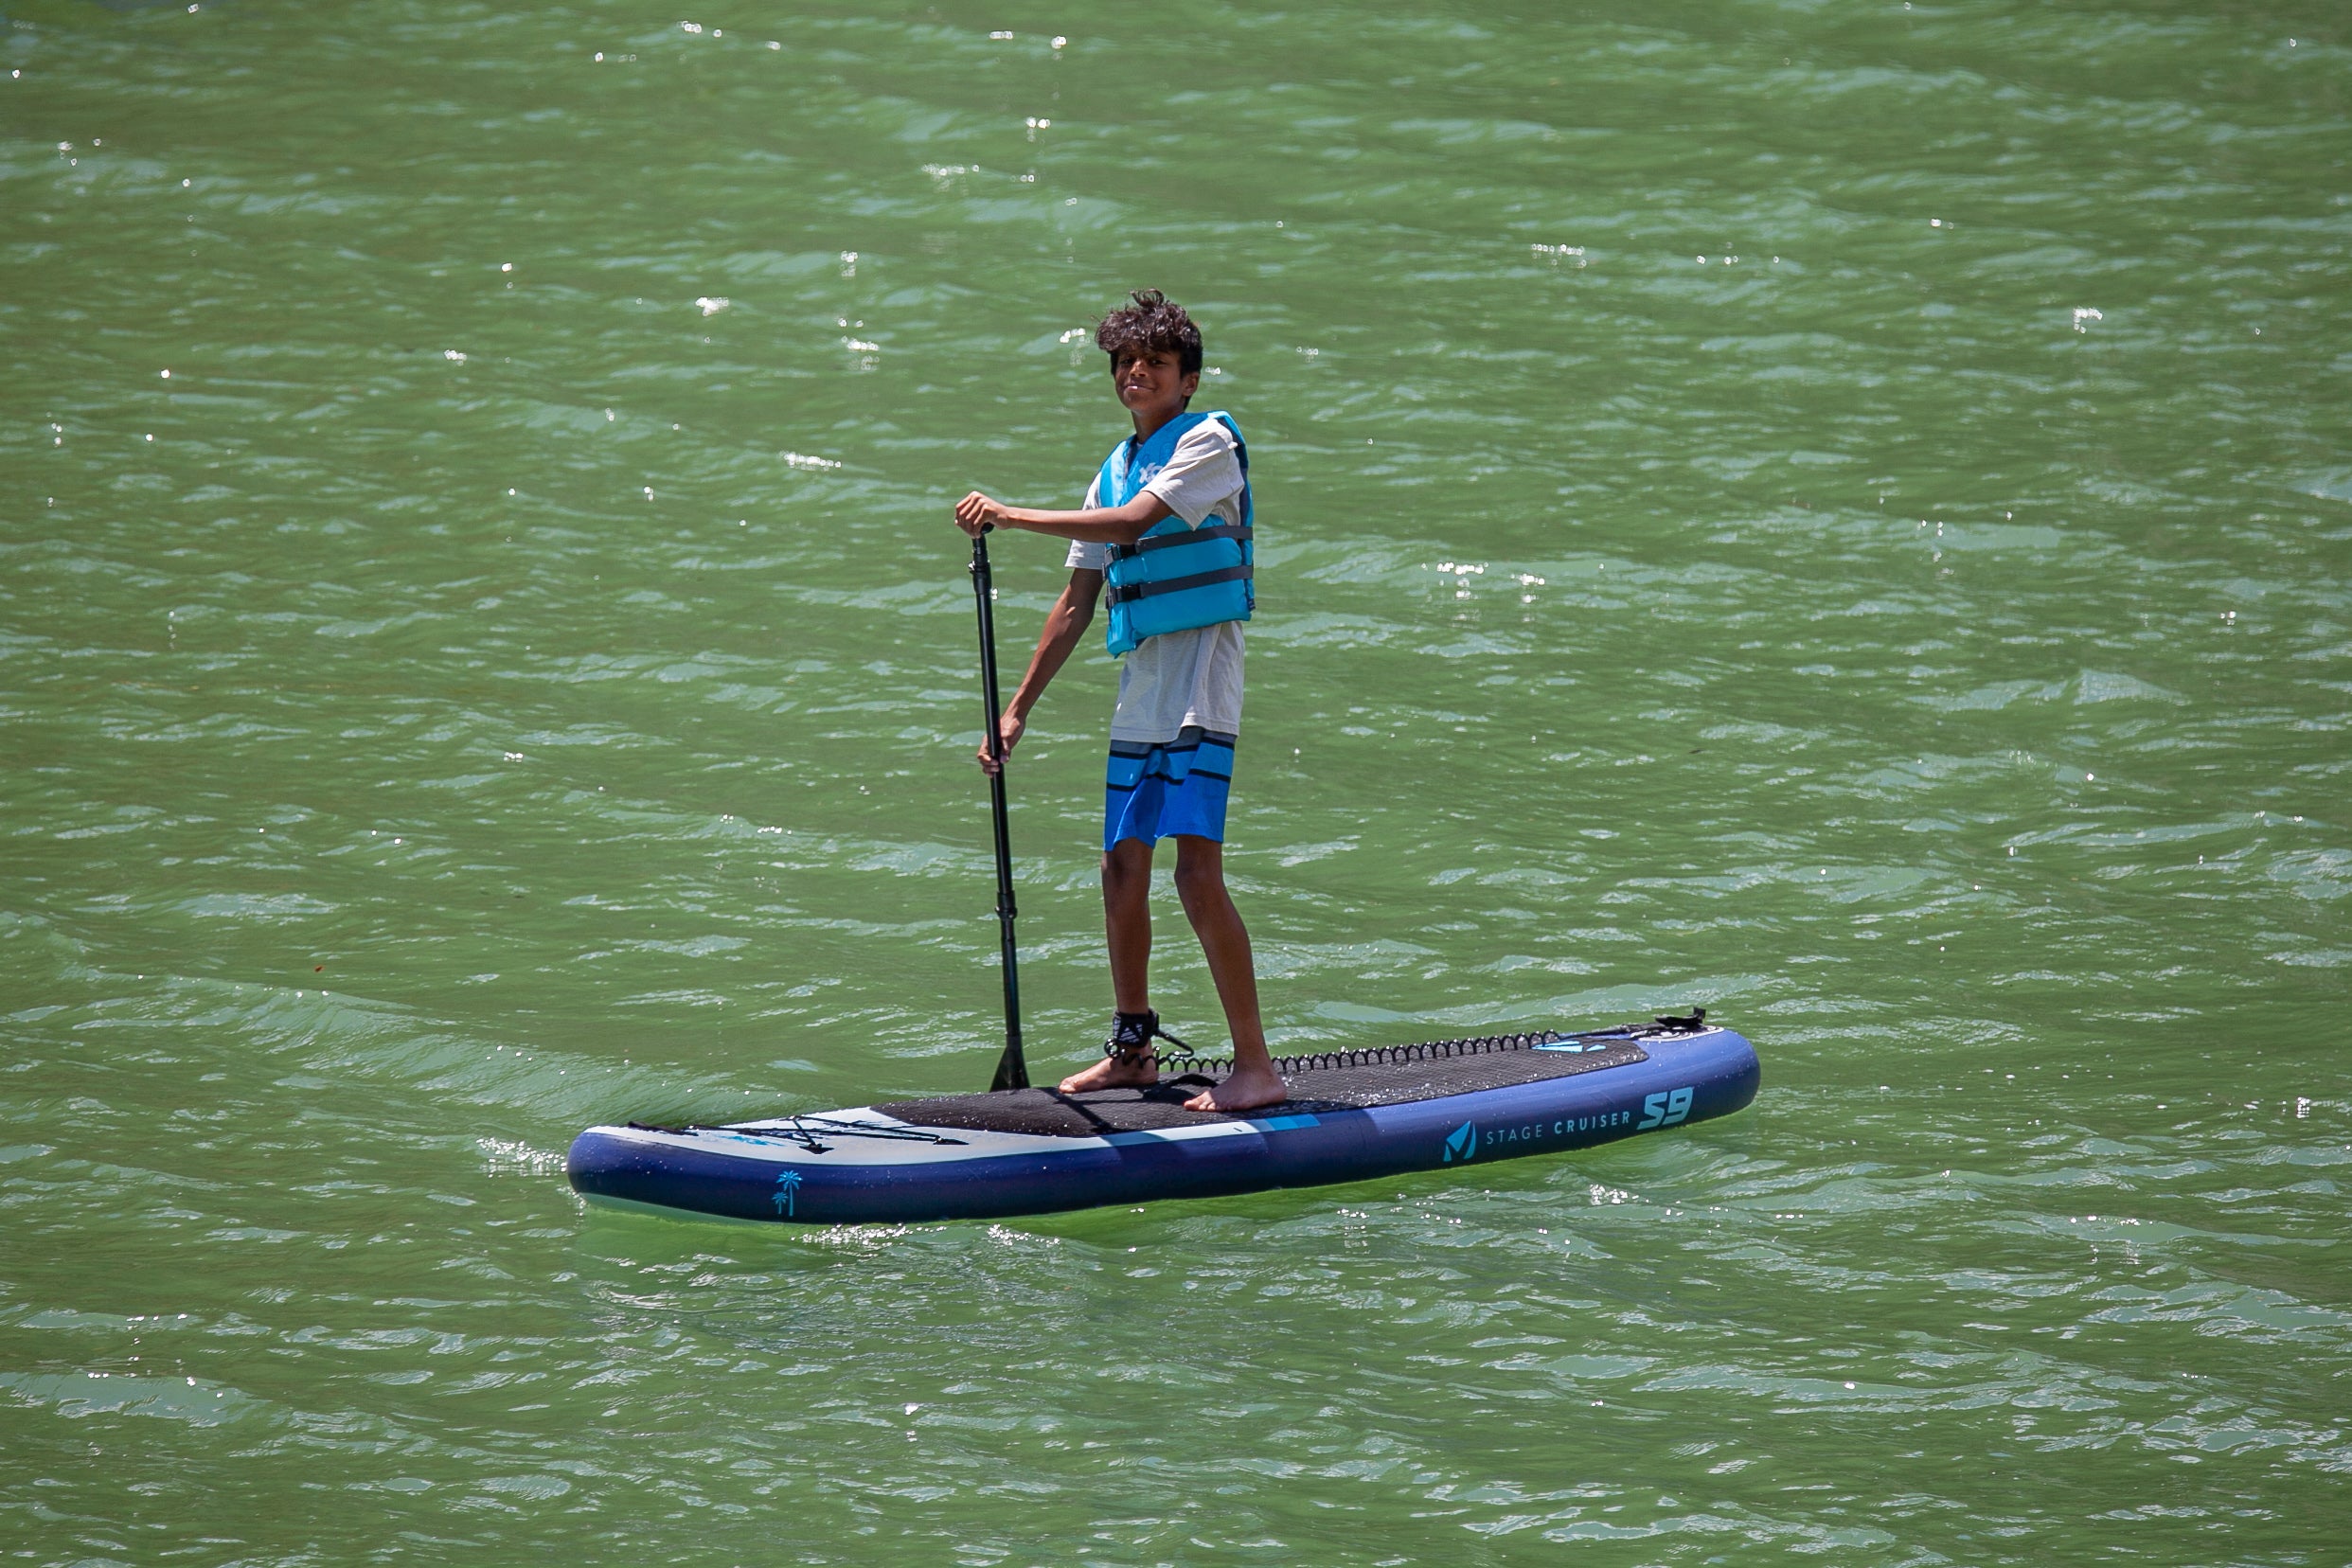 The S9 Cruiser is the perfect paddle board for teens and smaller adults looking to take advantage of easy turning and greater control. The S9 was designed with users between 80 and 130lbs in mind. 